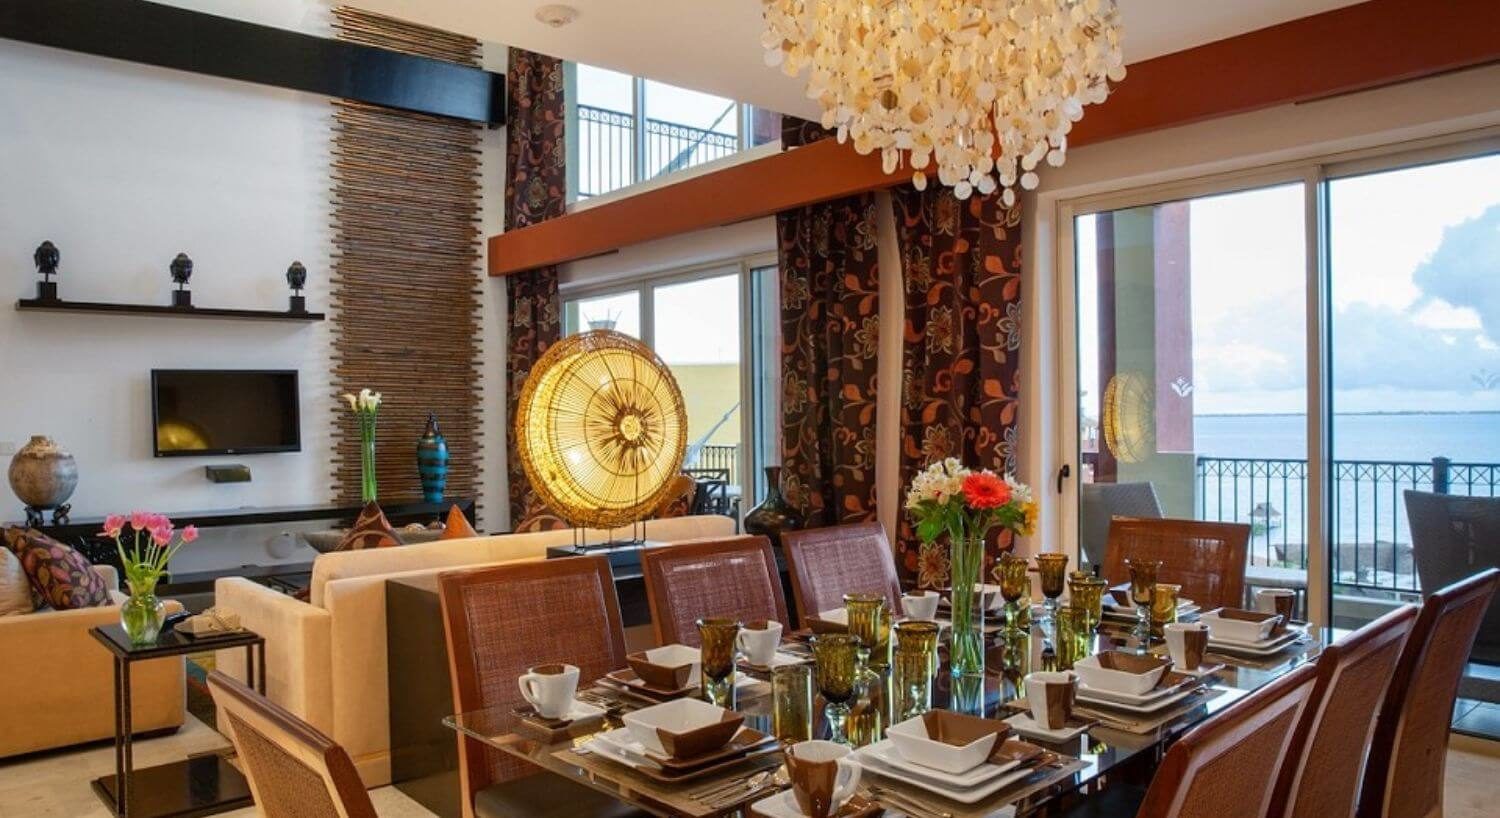 A dining and living area with a rectangular glass dining table set with white and brown dishes, eight dining chairs, a shell chandelier, a living area with a plush sofa and chairs, and flat screen TV, and sliding doors leading out to a patio with furniture and ocean views.